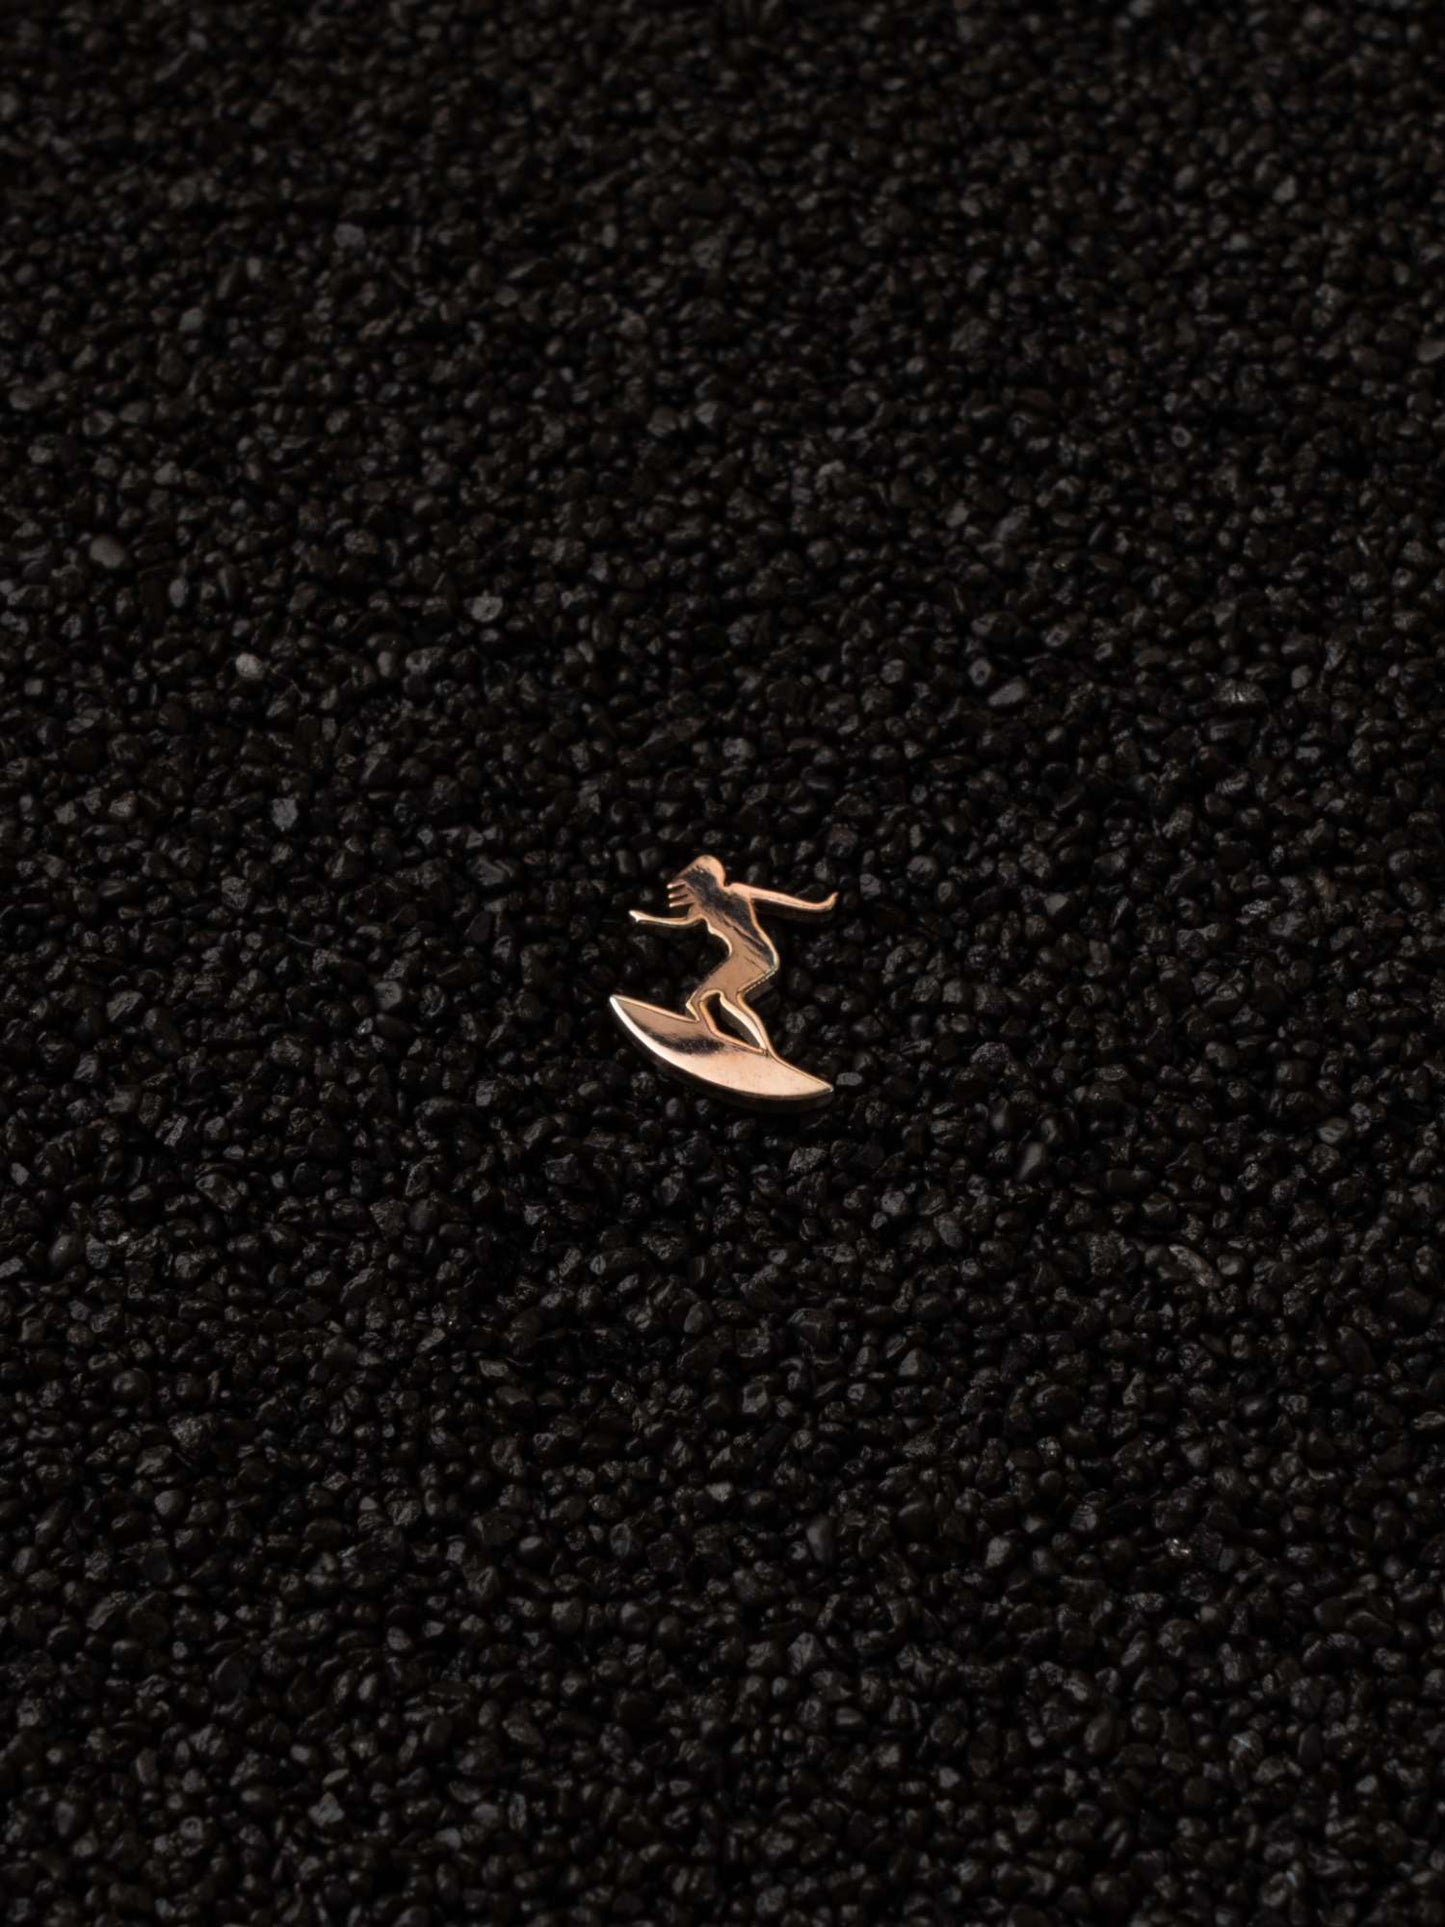 Surfing gold pin